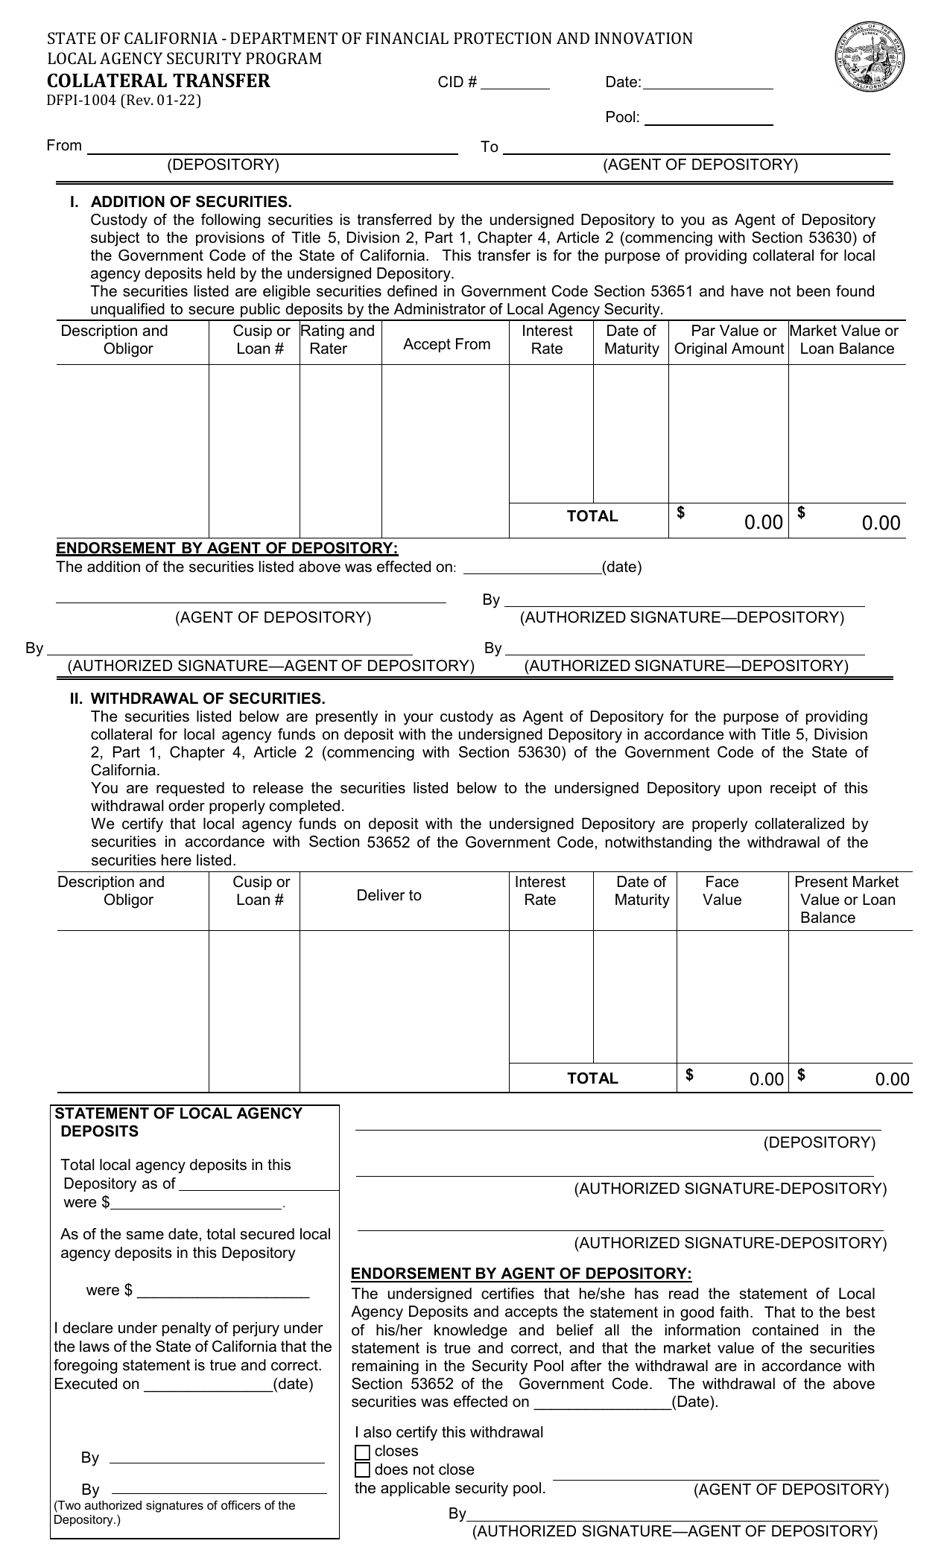 Form DFPI-1004 Collateral Transfer - Local Agency Security Program - California, Page 1